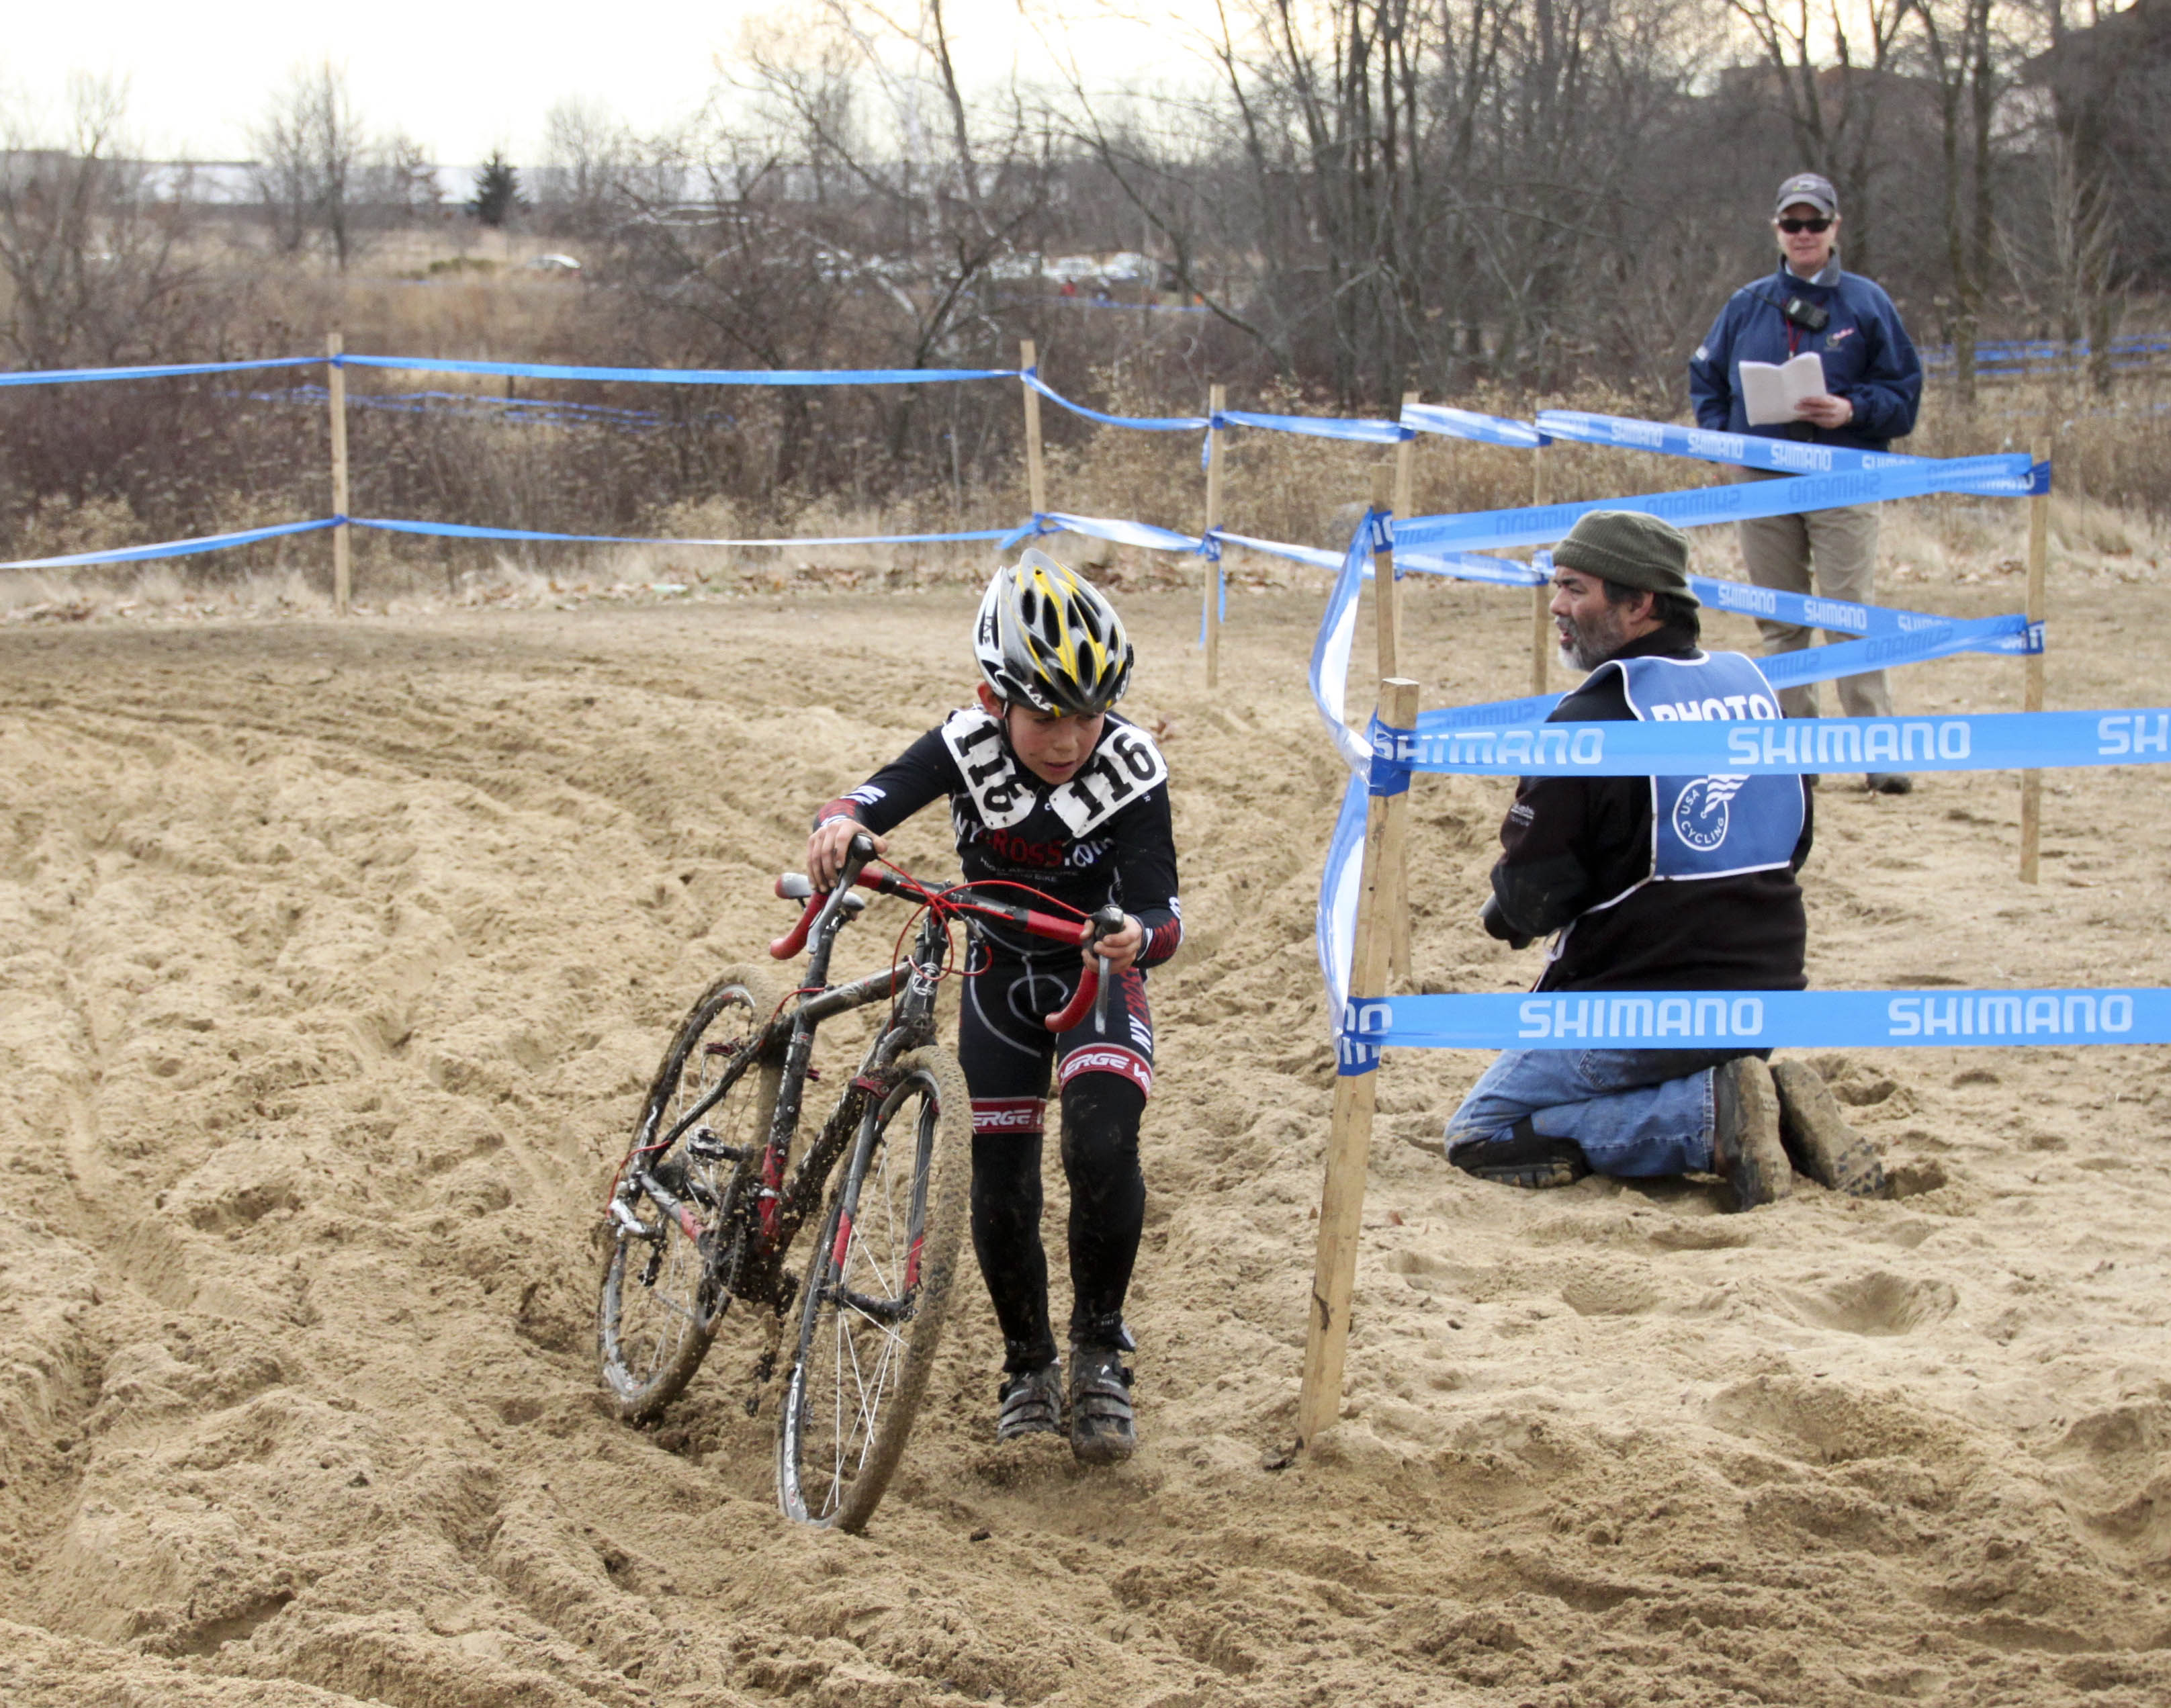 Pint-sized Harrison White packed a powerful punch. Junior Men 10-12, 2012 Cyclocross National Championships. ©Cyclocross Magazine